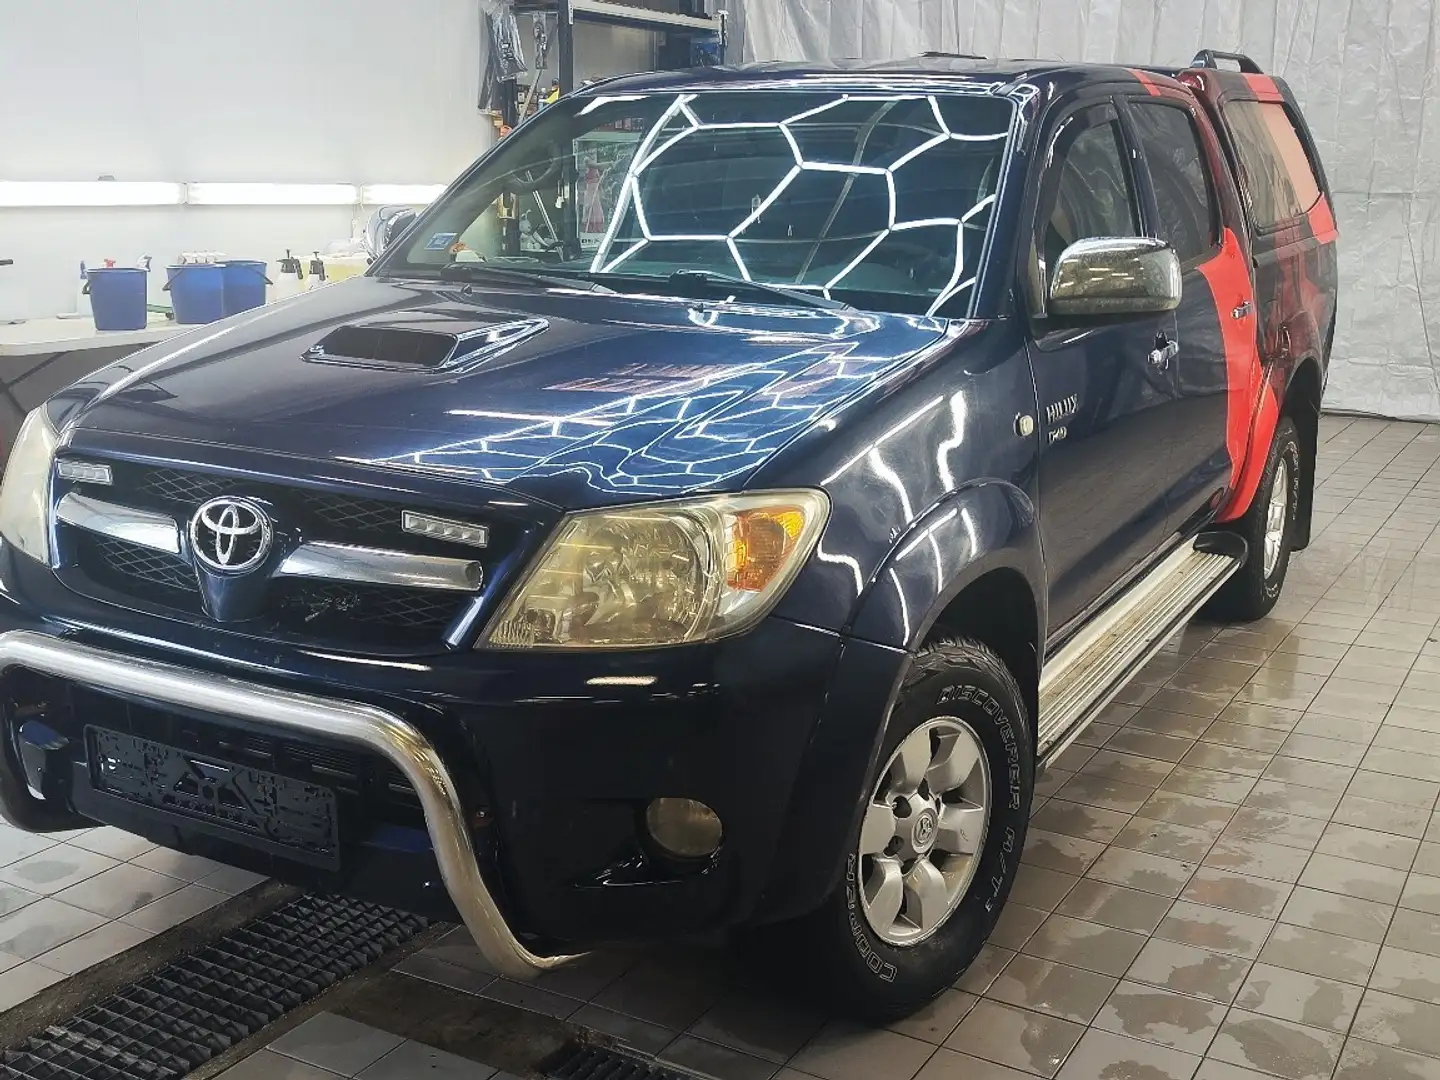 Toyota Hilux 4x4 Double Cab.to sell only Africa Noir - 2